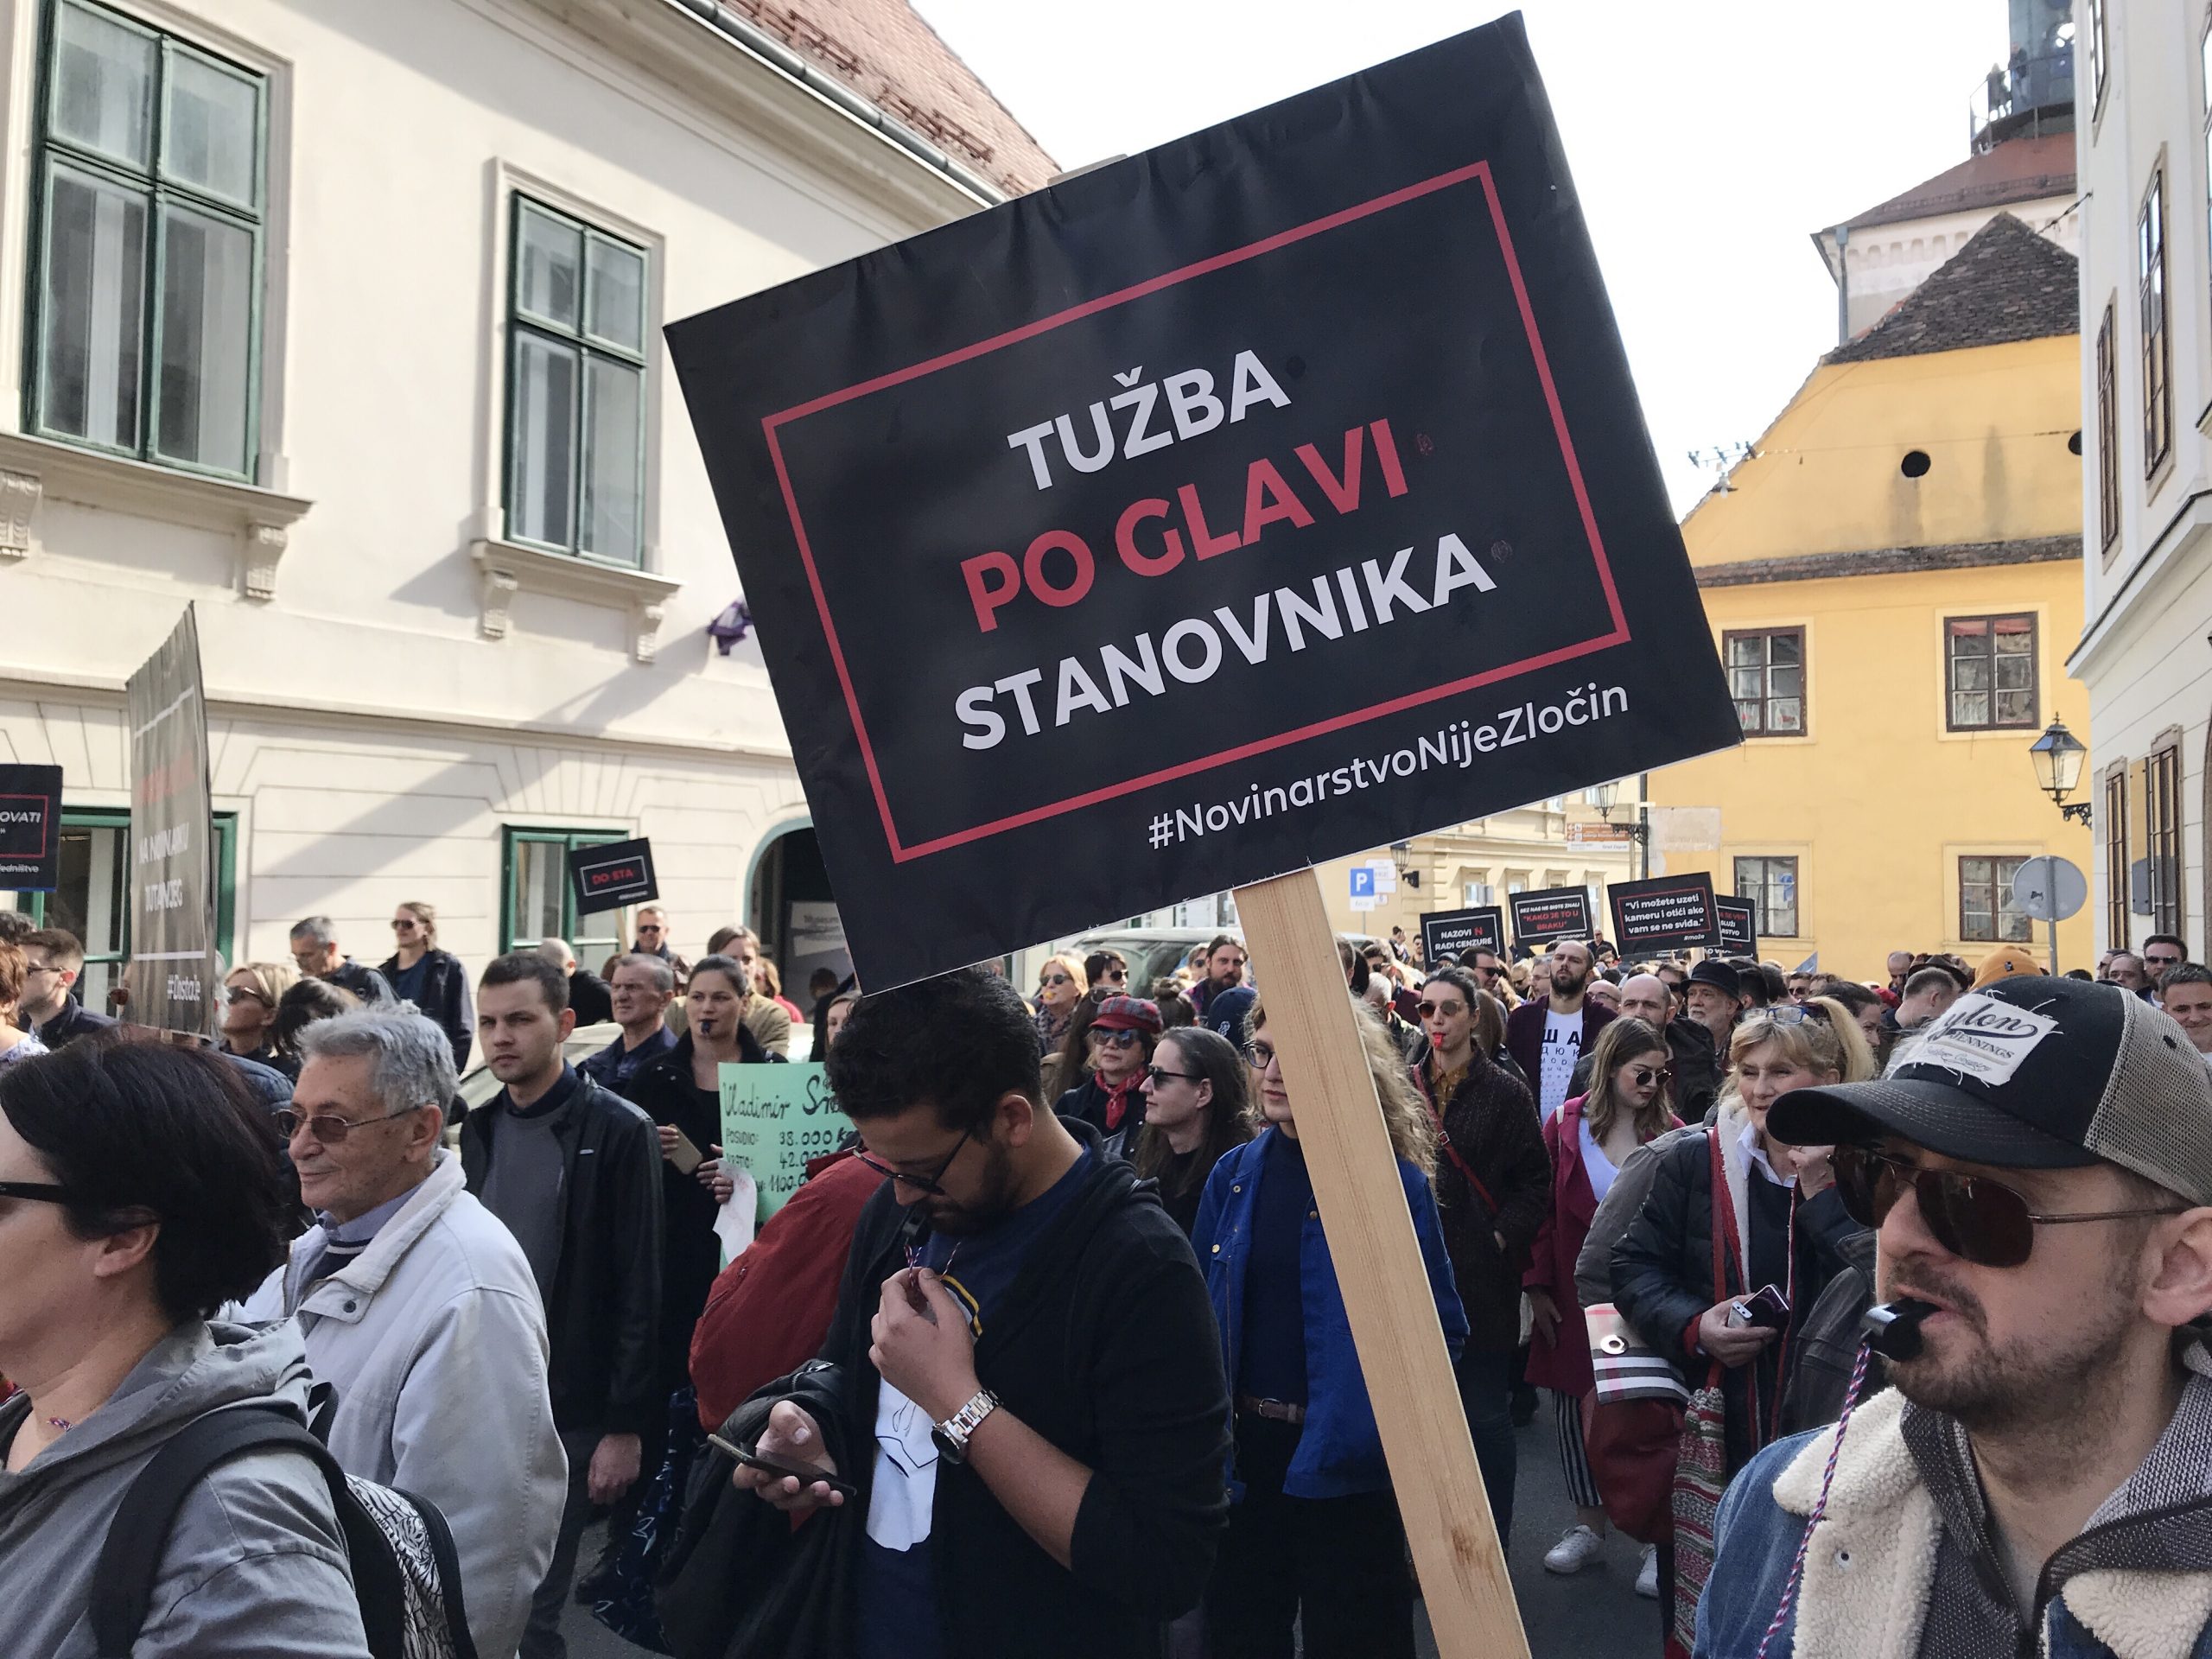 Croatian Journalists Union Deplores ‘Intimidating’ Rise in Lawsuits